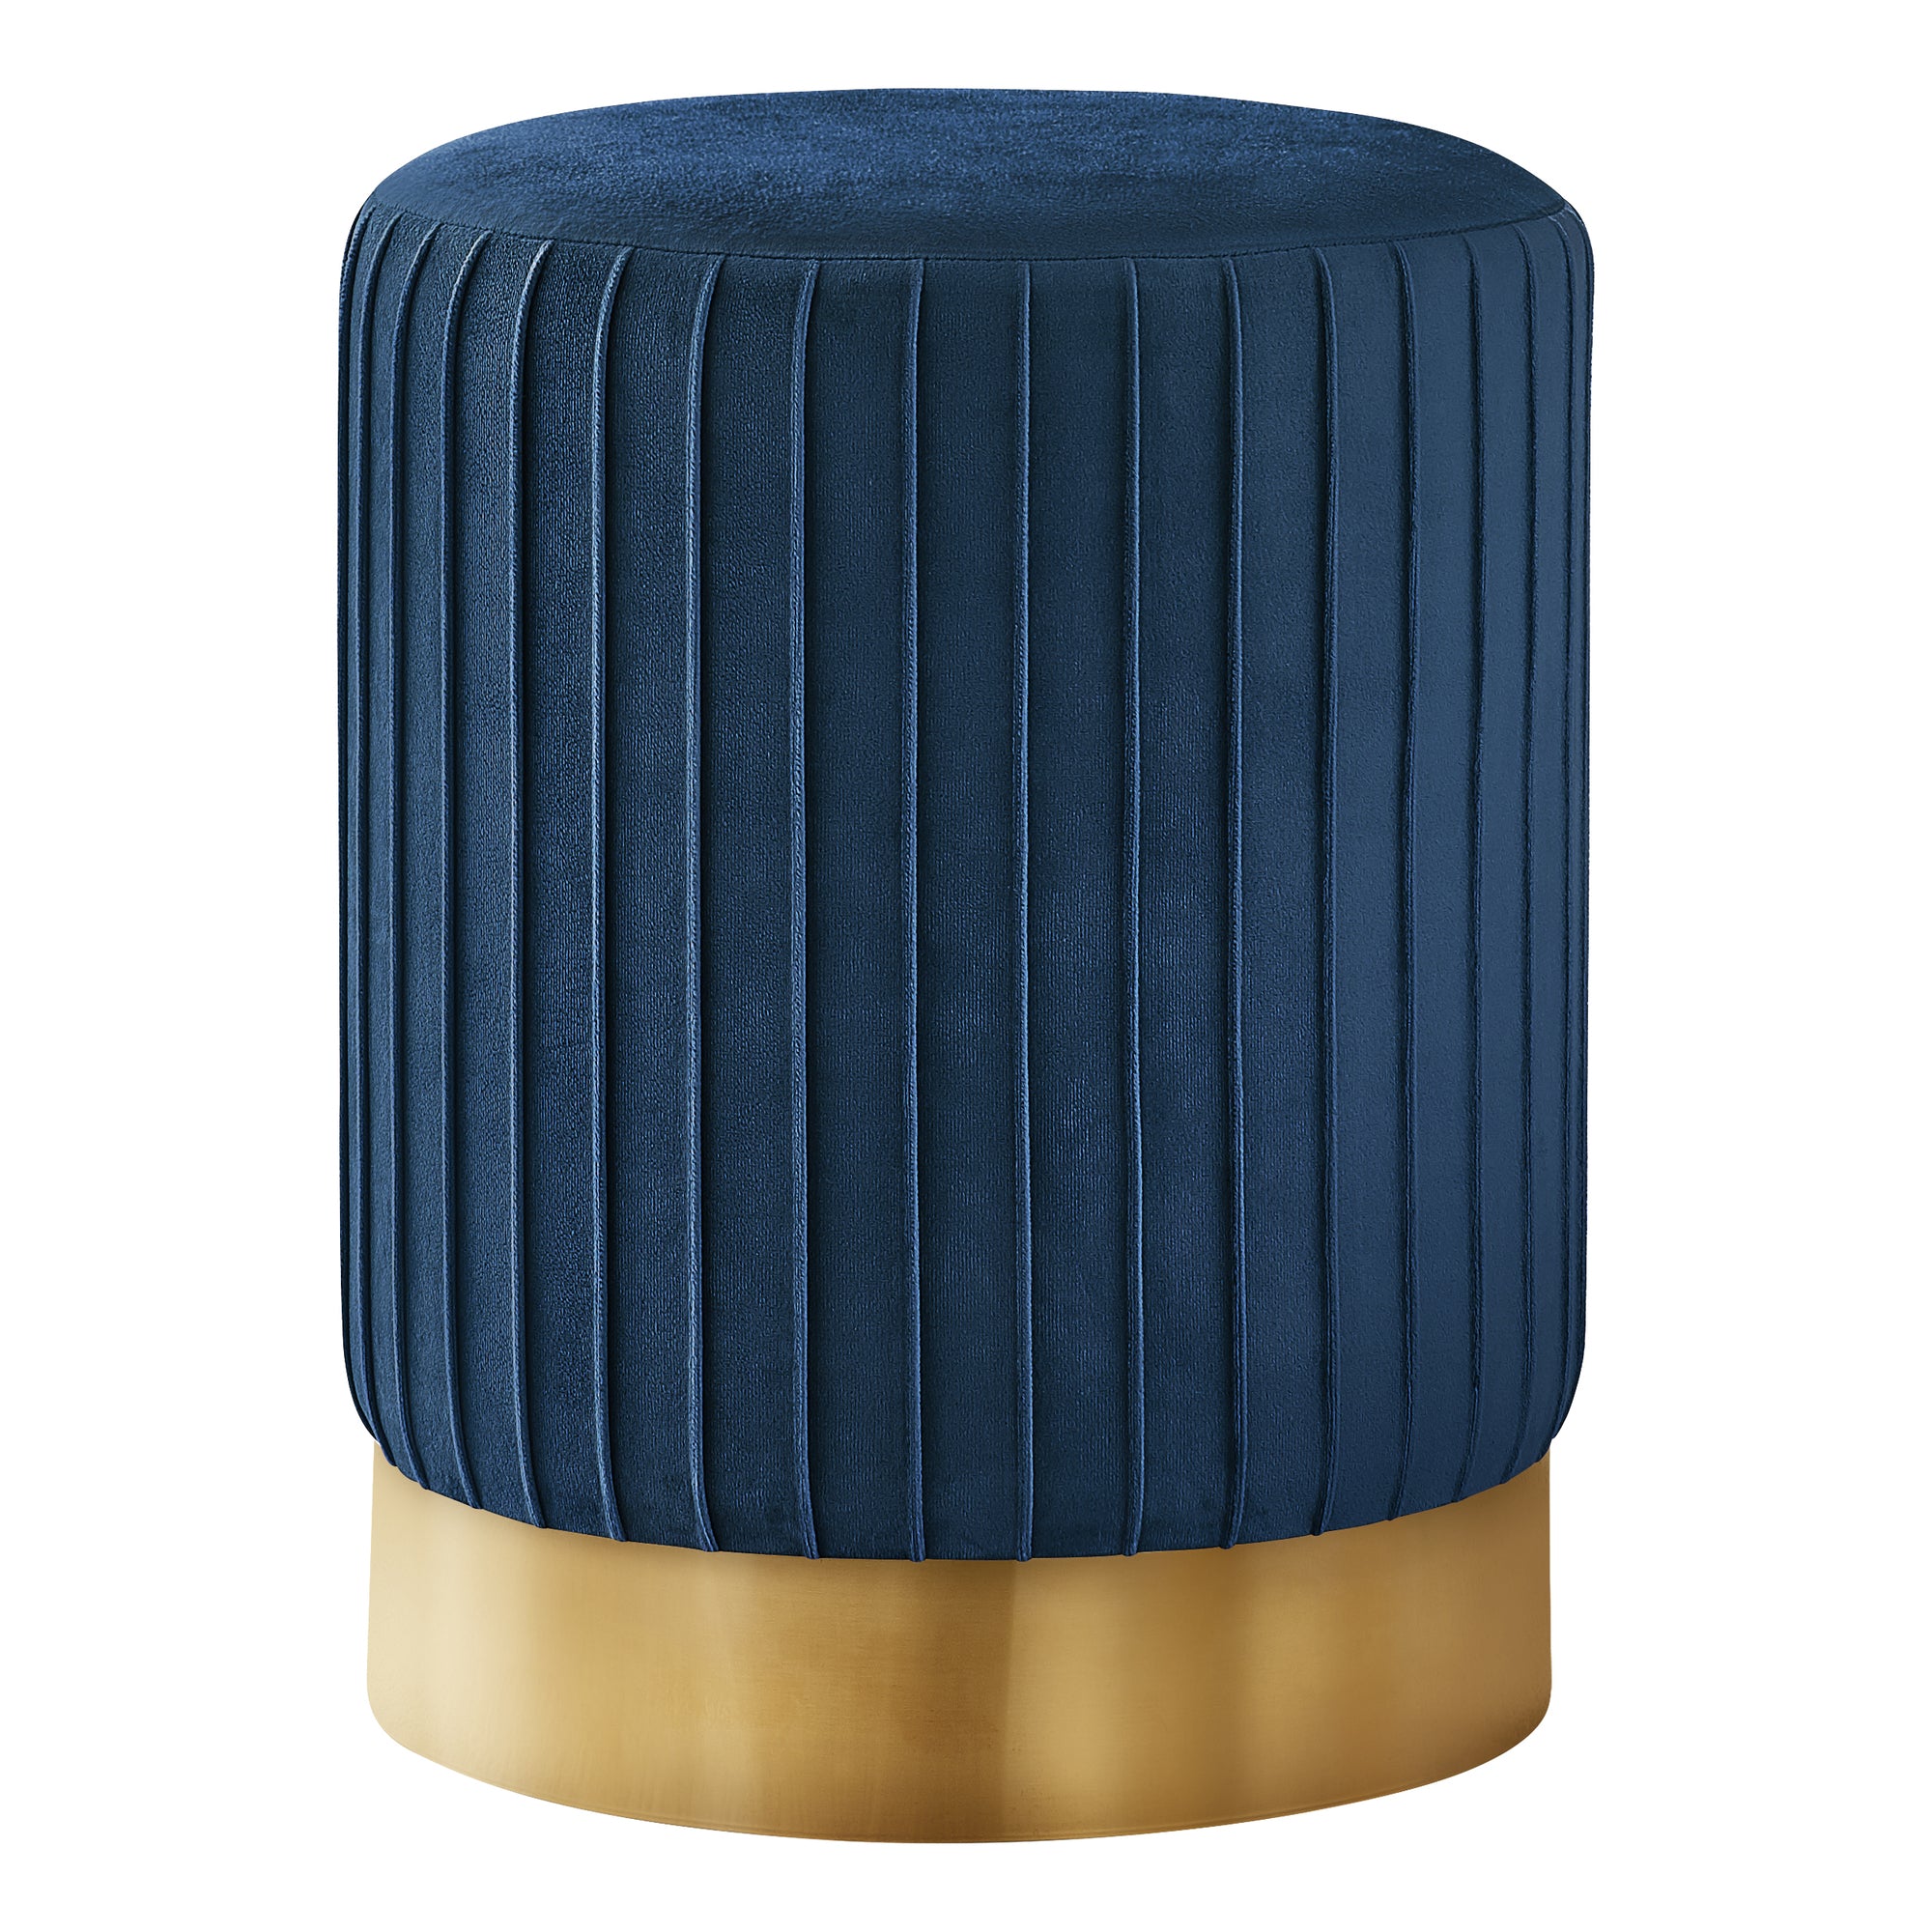 MN-329021    Ottoman, Pouf, Footrest, Foot Stool, 14" Round, Velvet Fabric, Metal Base, Blue, Gold, Contemporary, Glam, Modern